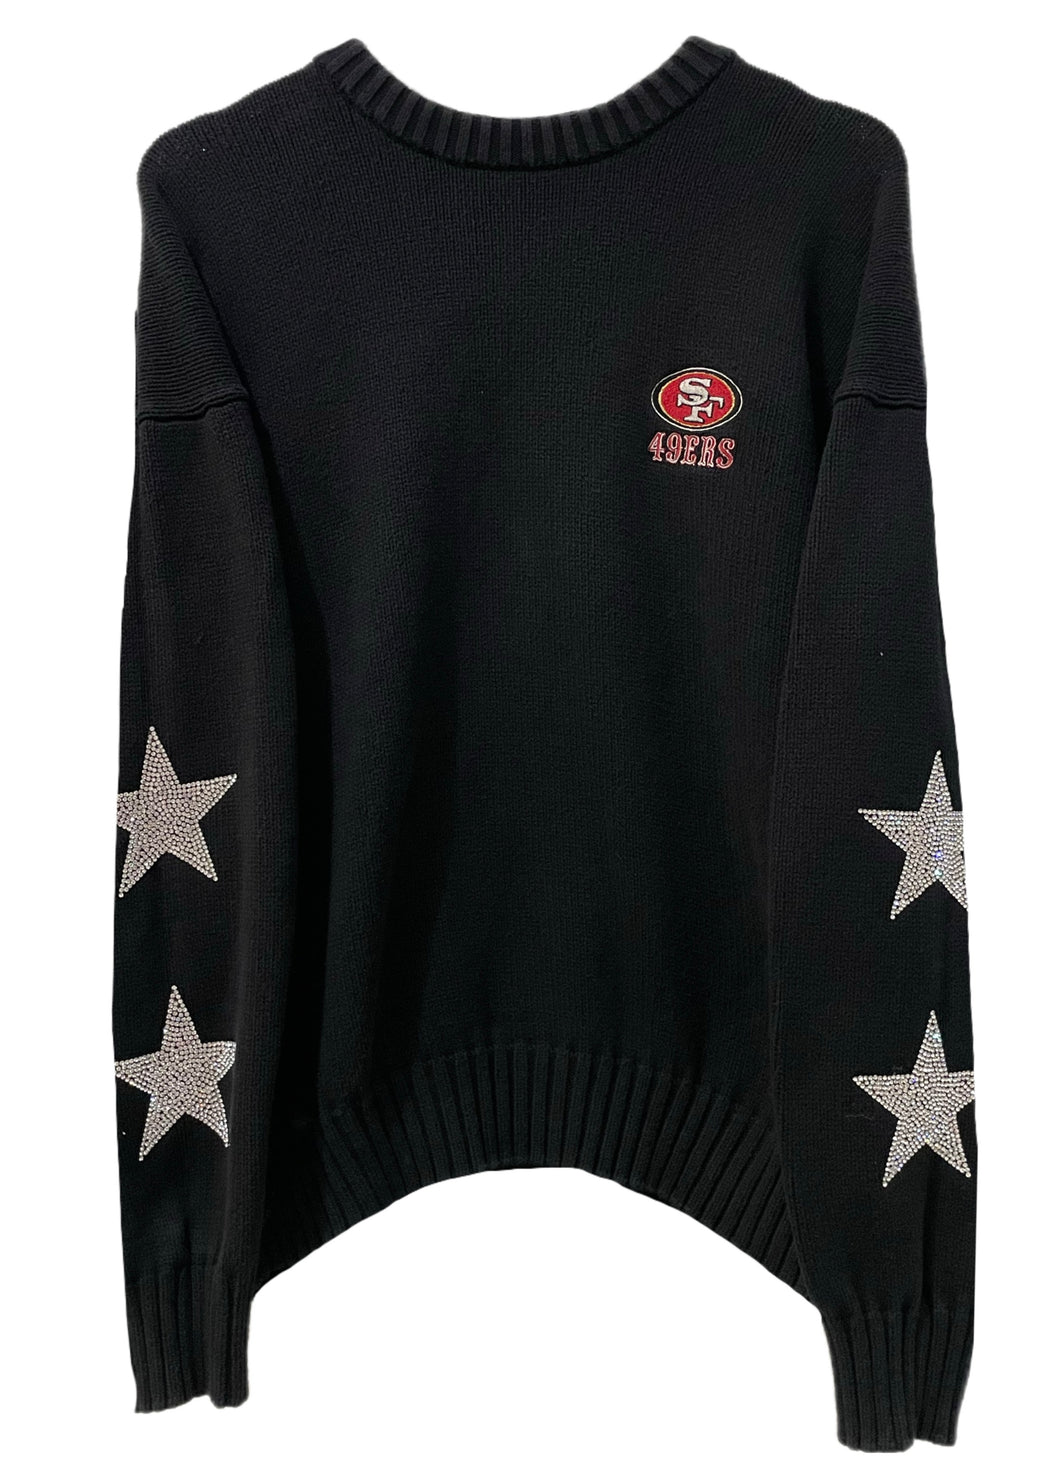 San Francisco 49ers, NFL One of a KIND Vintage “Rare Find” Knit Sweater with Crystal Star Design